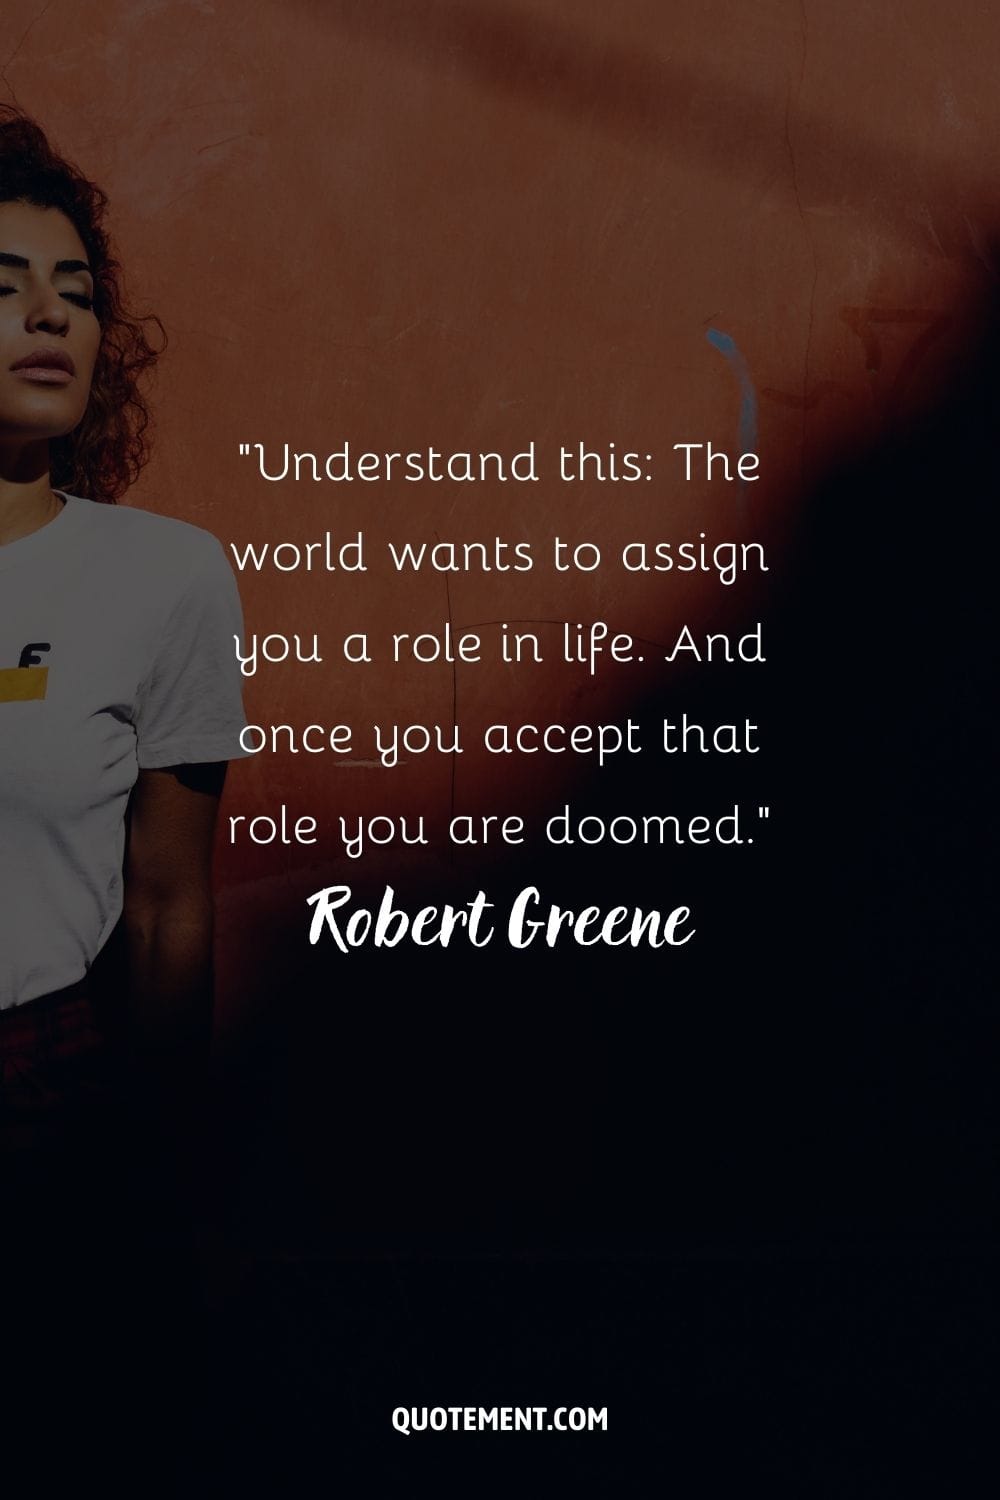 “Understand this The world wants to assign you a role in life. And once you accept that role you are doomed.” ― Robert Greene, The 48 Laws of Power